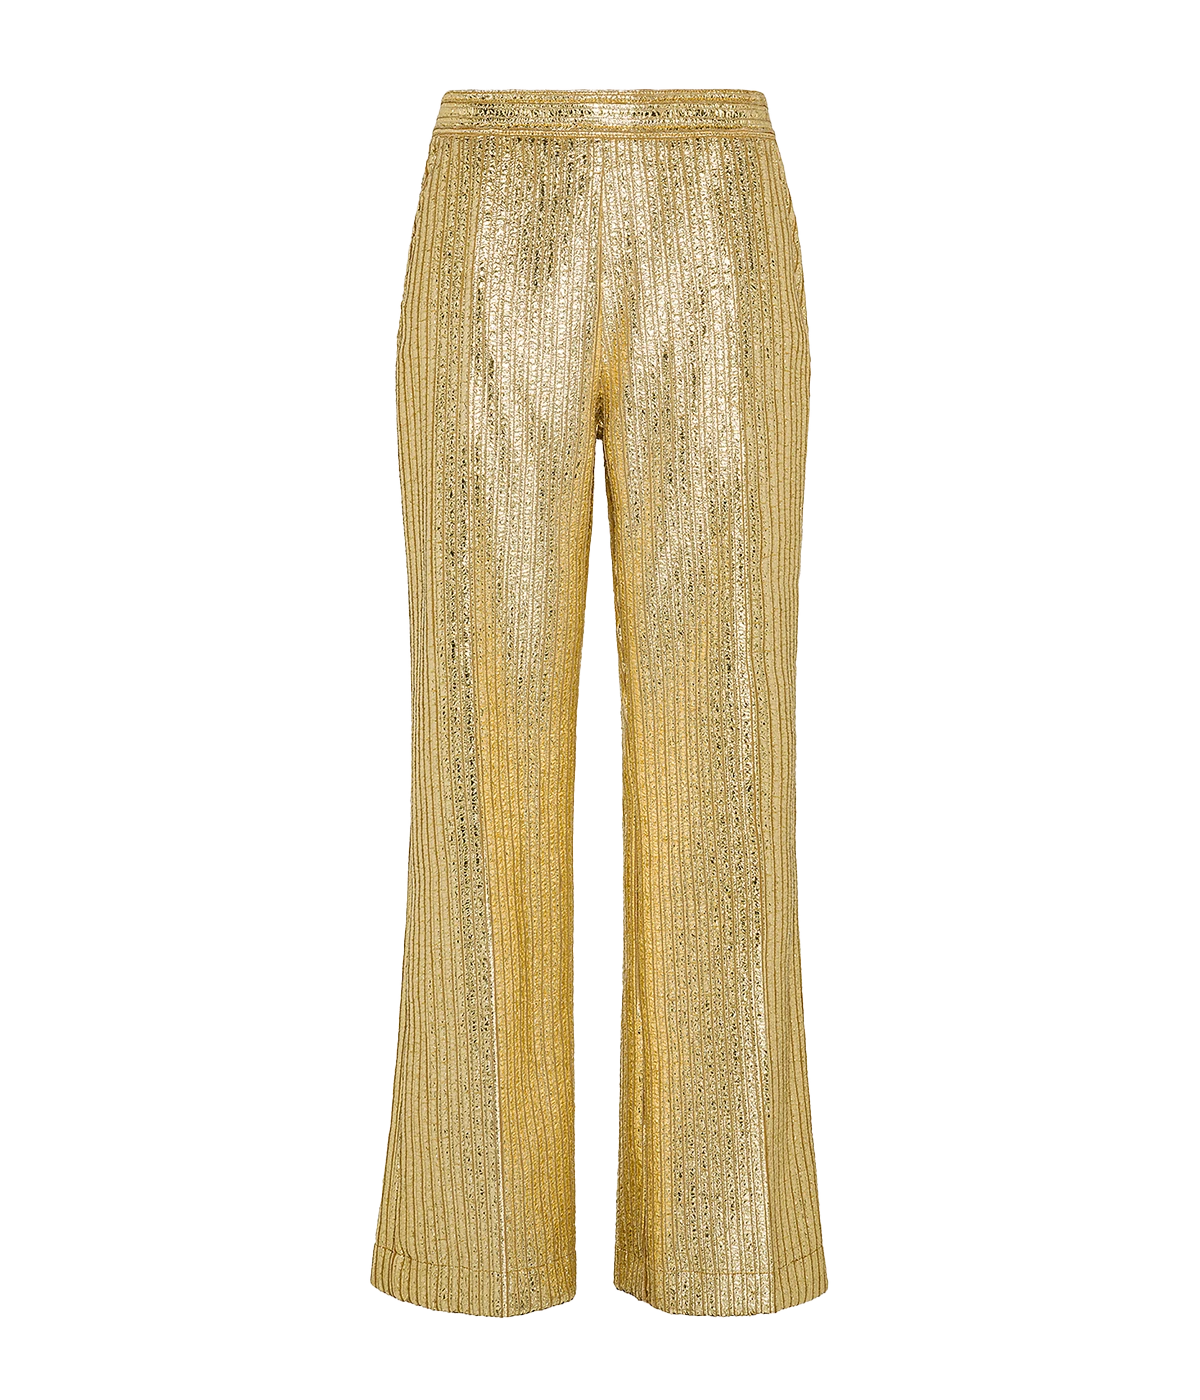 Long, laminated ribbed velvet ribbed pants, featuring a front pleat, side zip closure, side slit pockets and back welt pockets. Made in Italy. Matching set, party outfit, New Year's Eve, Christmas party, festive season look, gold outfit, comfortable, flattering.